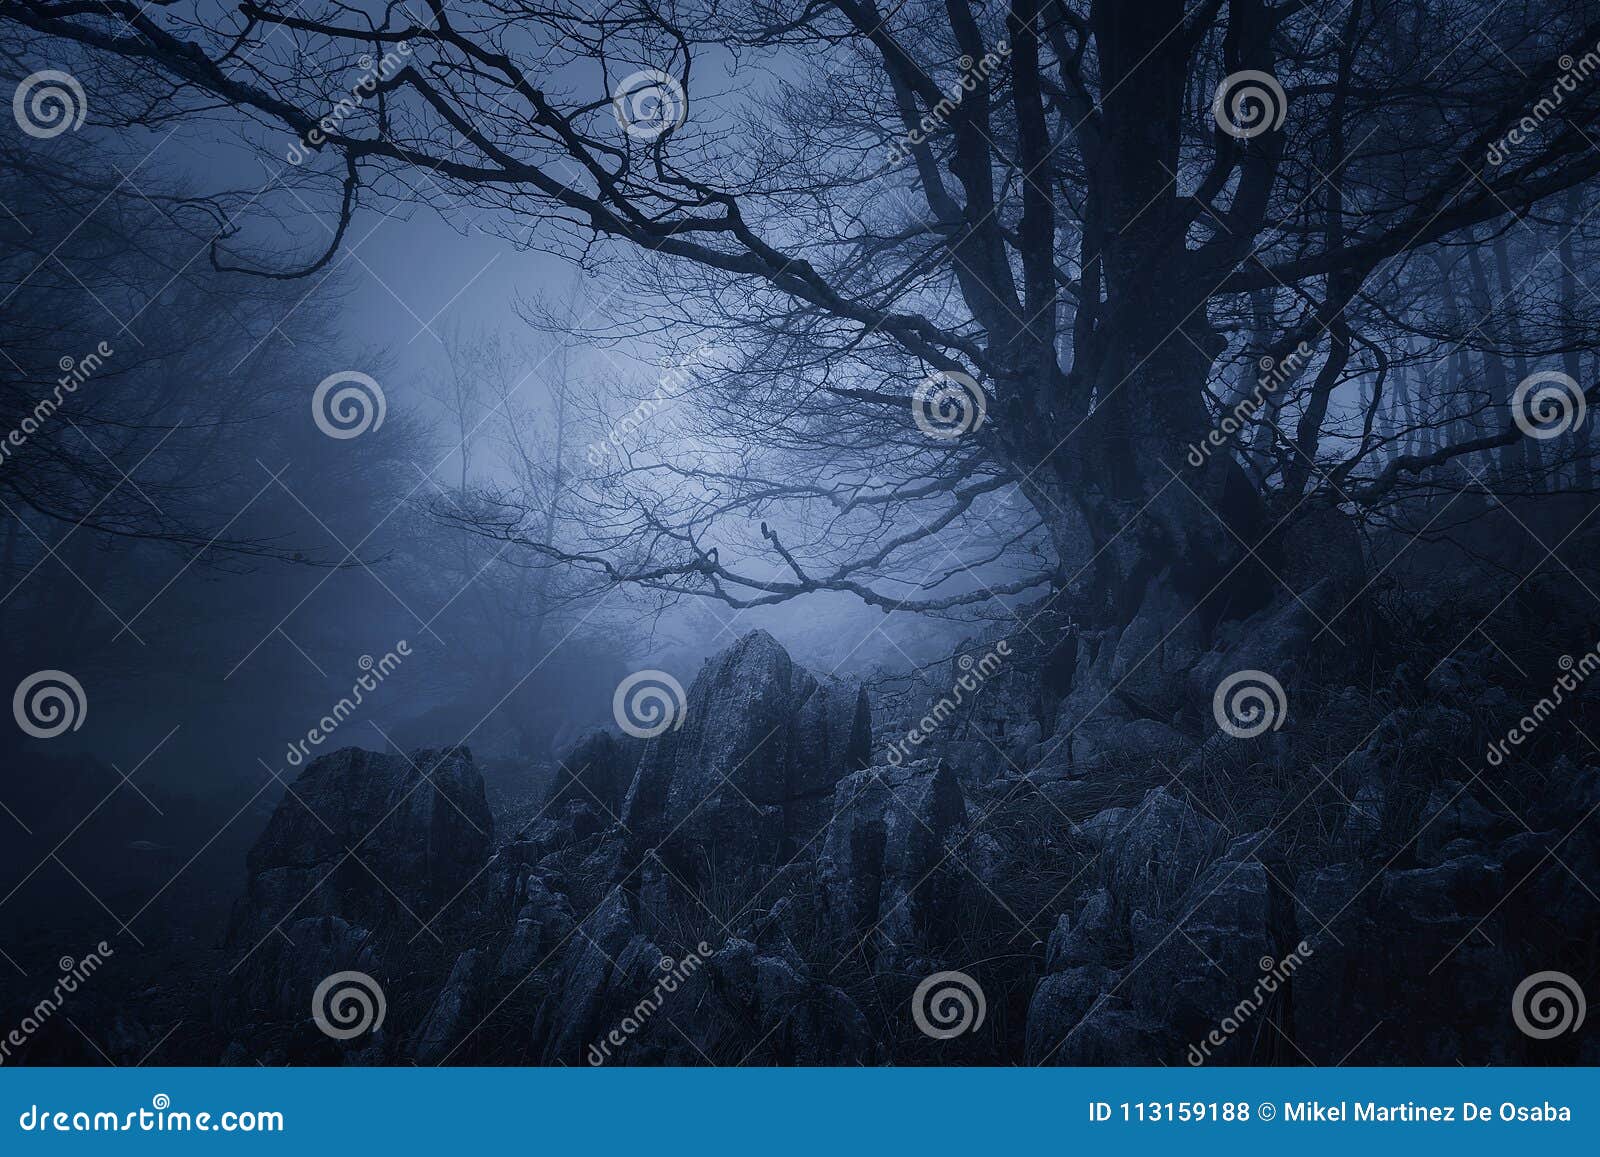 horror landscape of dark forest with scary tree